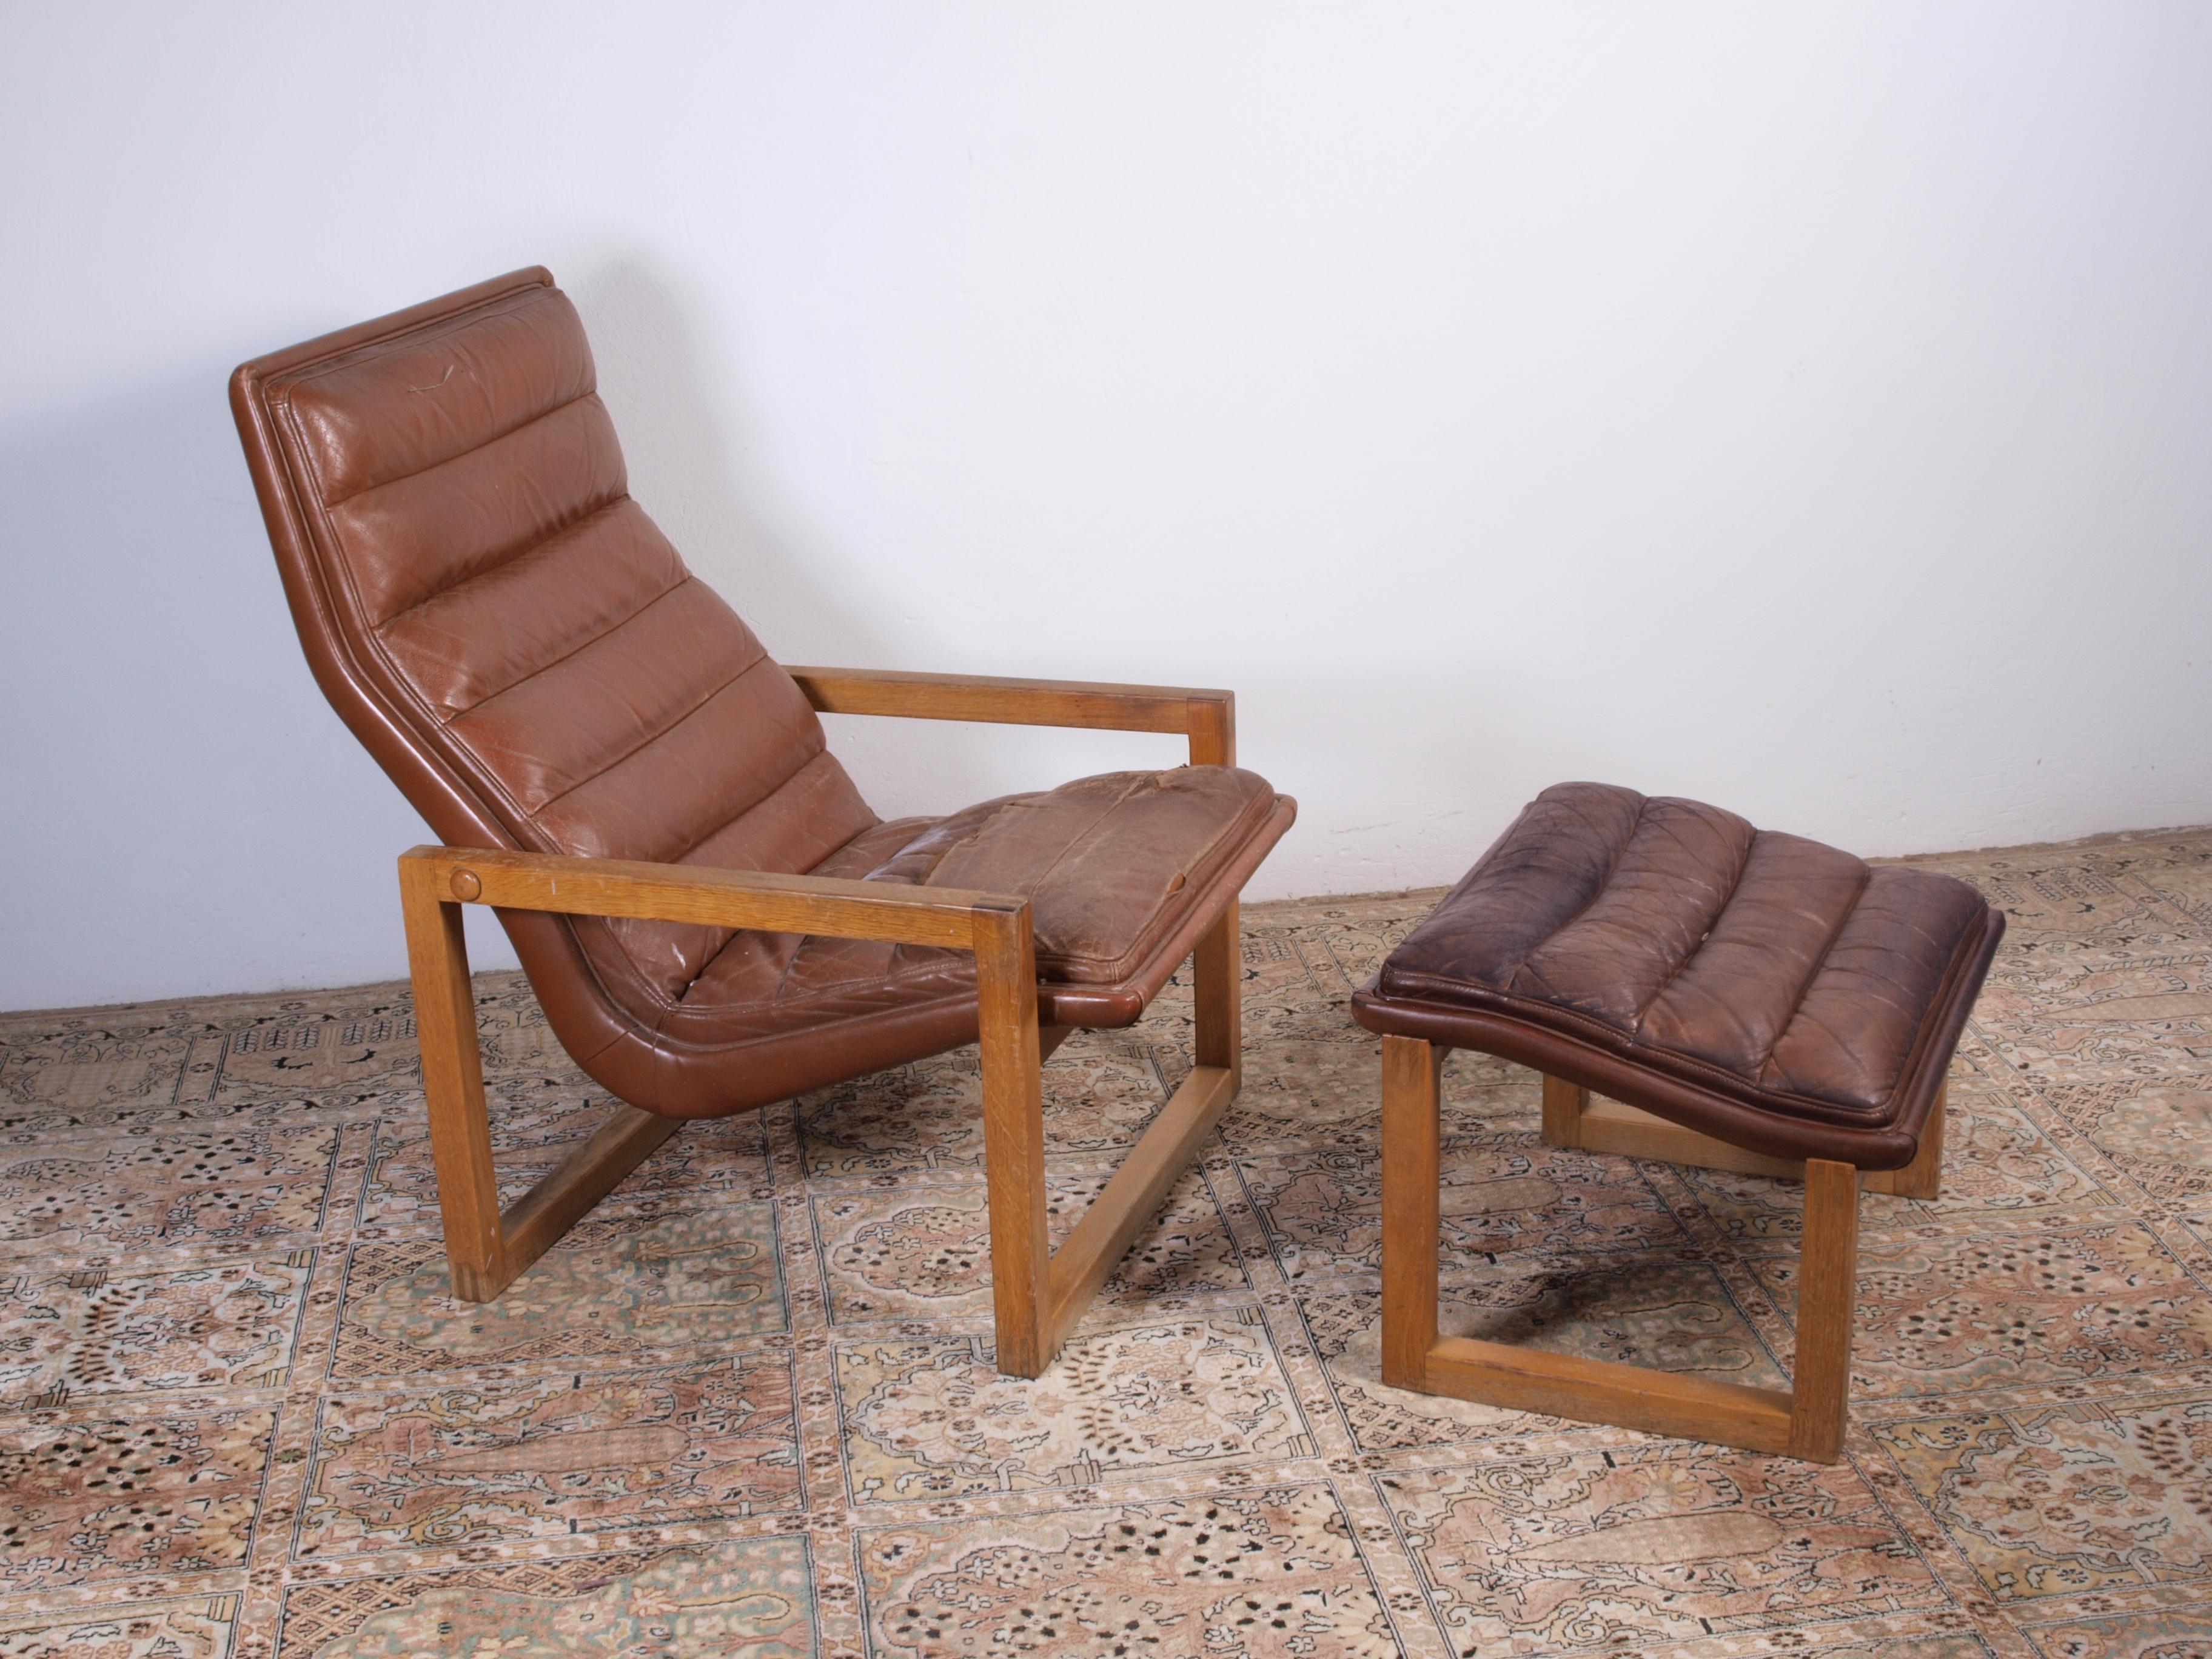 Vintage leather armchair + ottoman from an unknown designer. Fine stitched joints and solid wood. Threads to Arne Norell, Børge Mogensen, and other Scandinavian architects.

Requires reupholstering for both the chair and ottoman